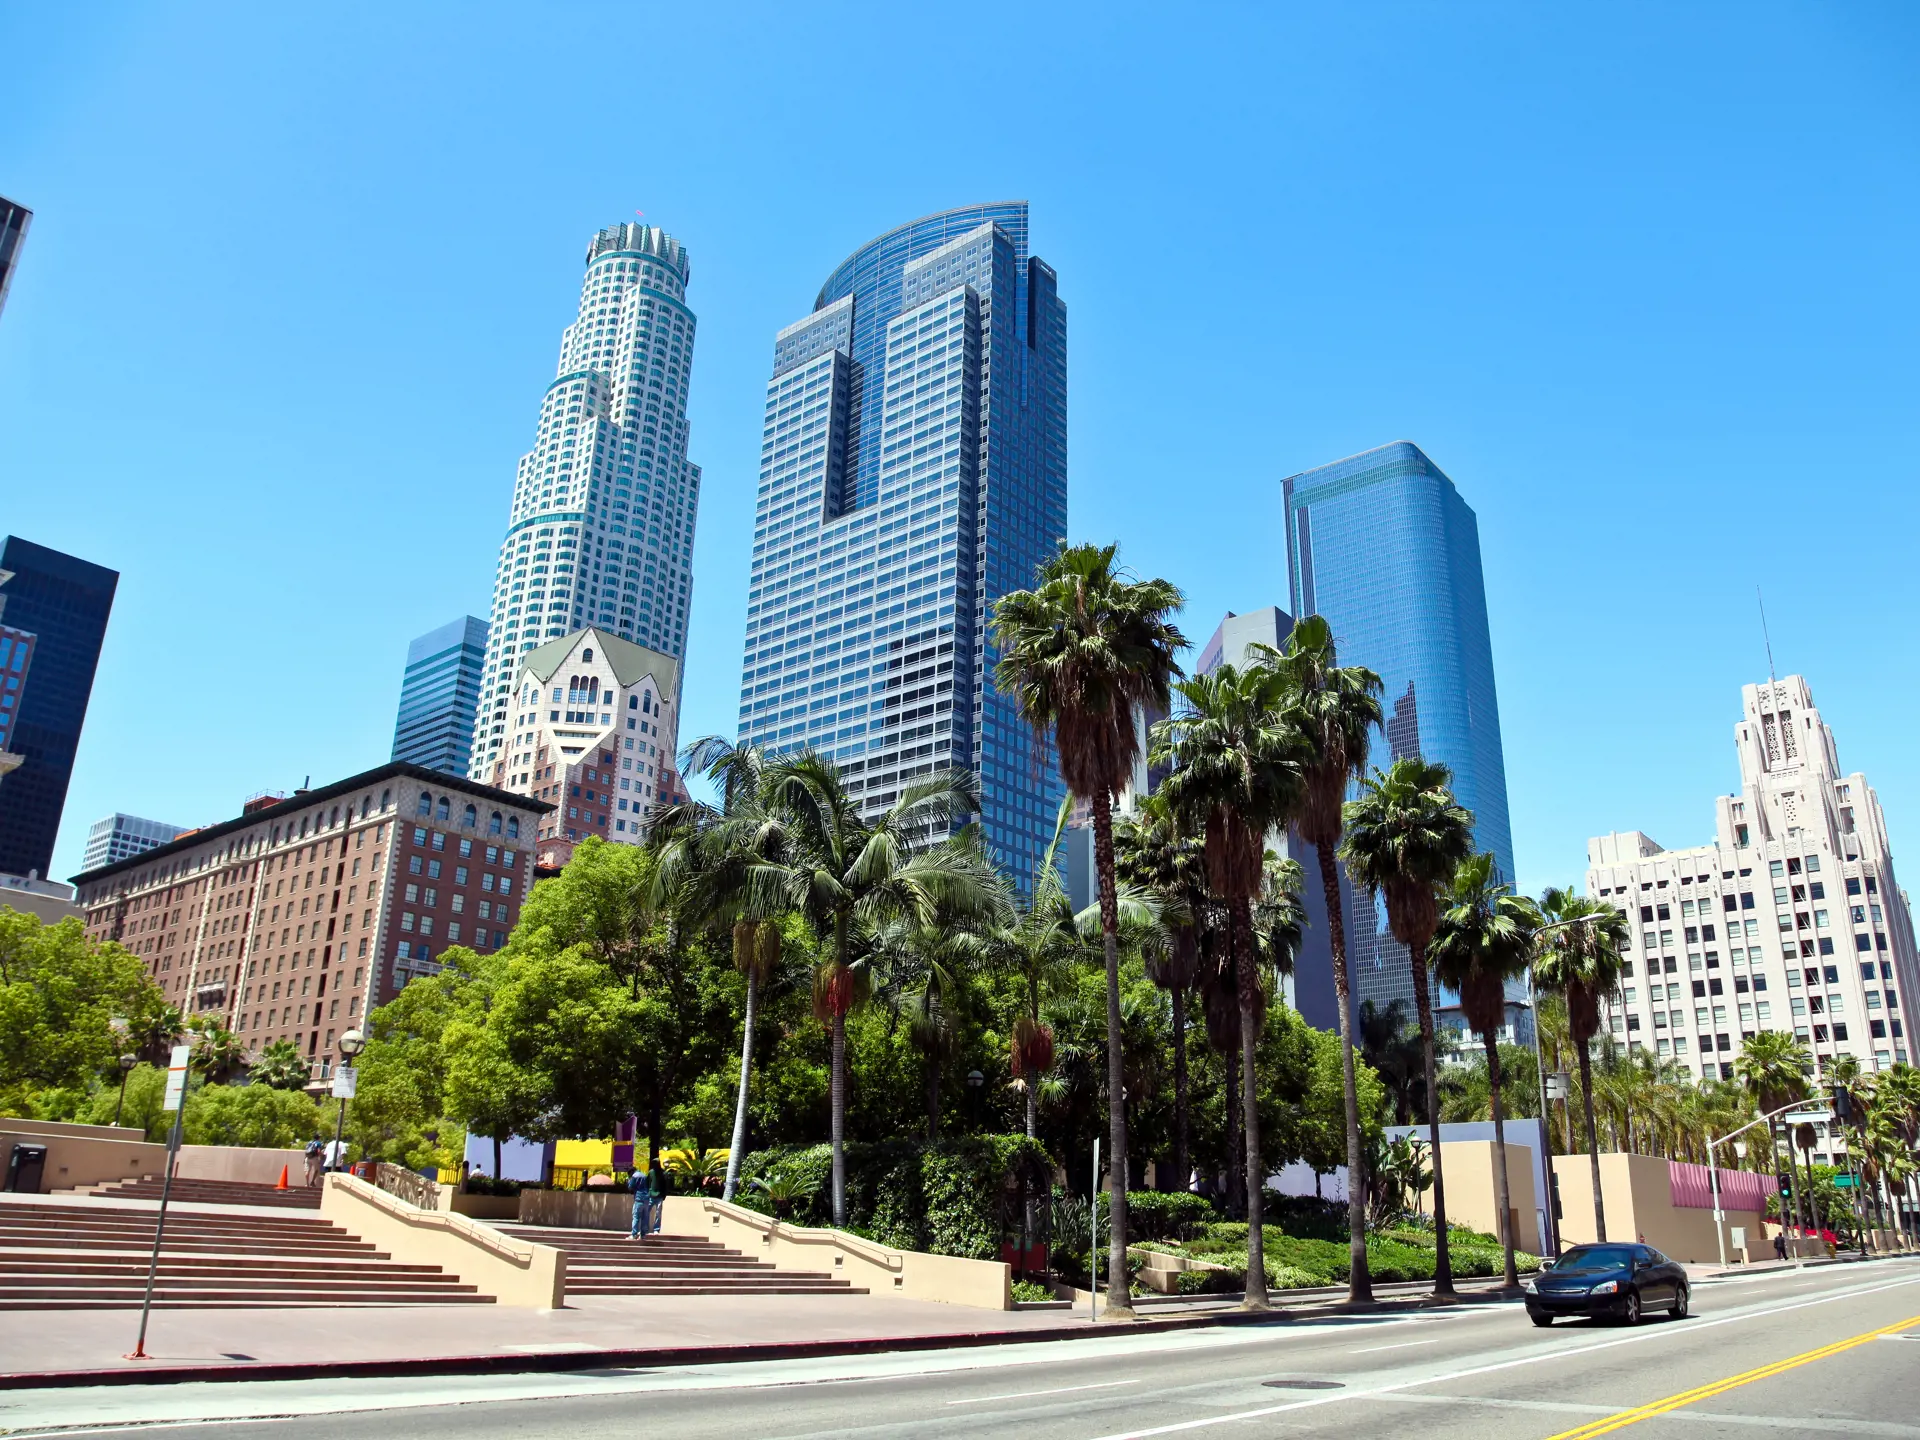 shutterstock_159014972 Panorama of Los Angeles Downtown.jpg